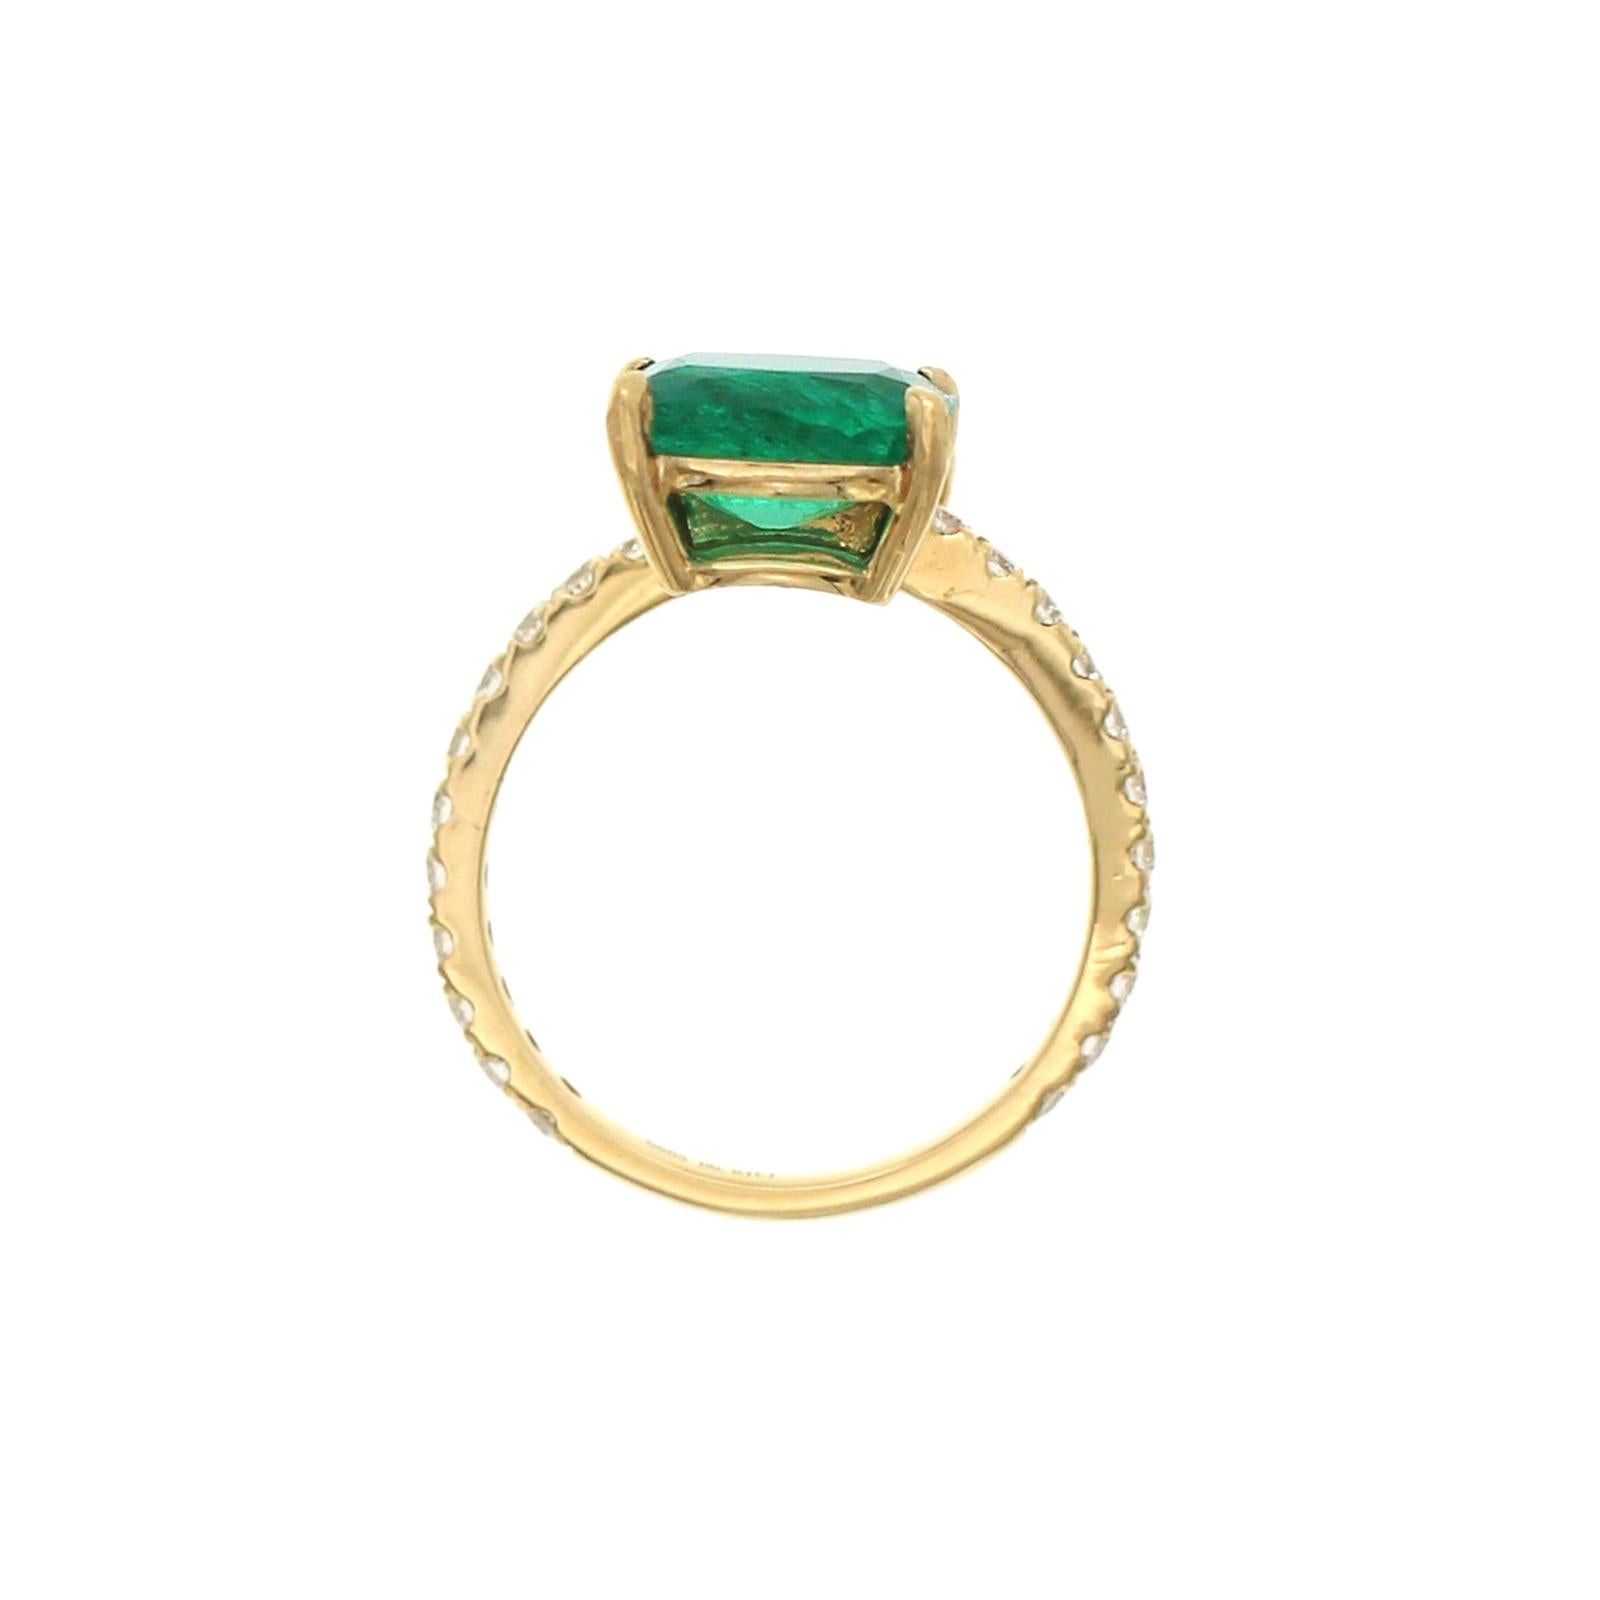 2.69 CT Zambian Emerald & 0.90 CT Diamonds in 14K Yellow Gold Engagement Ring For Sale 2